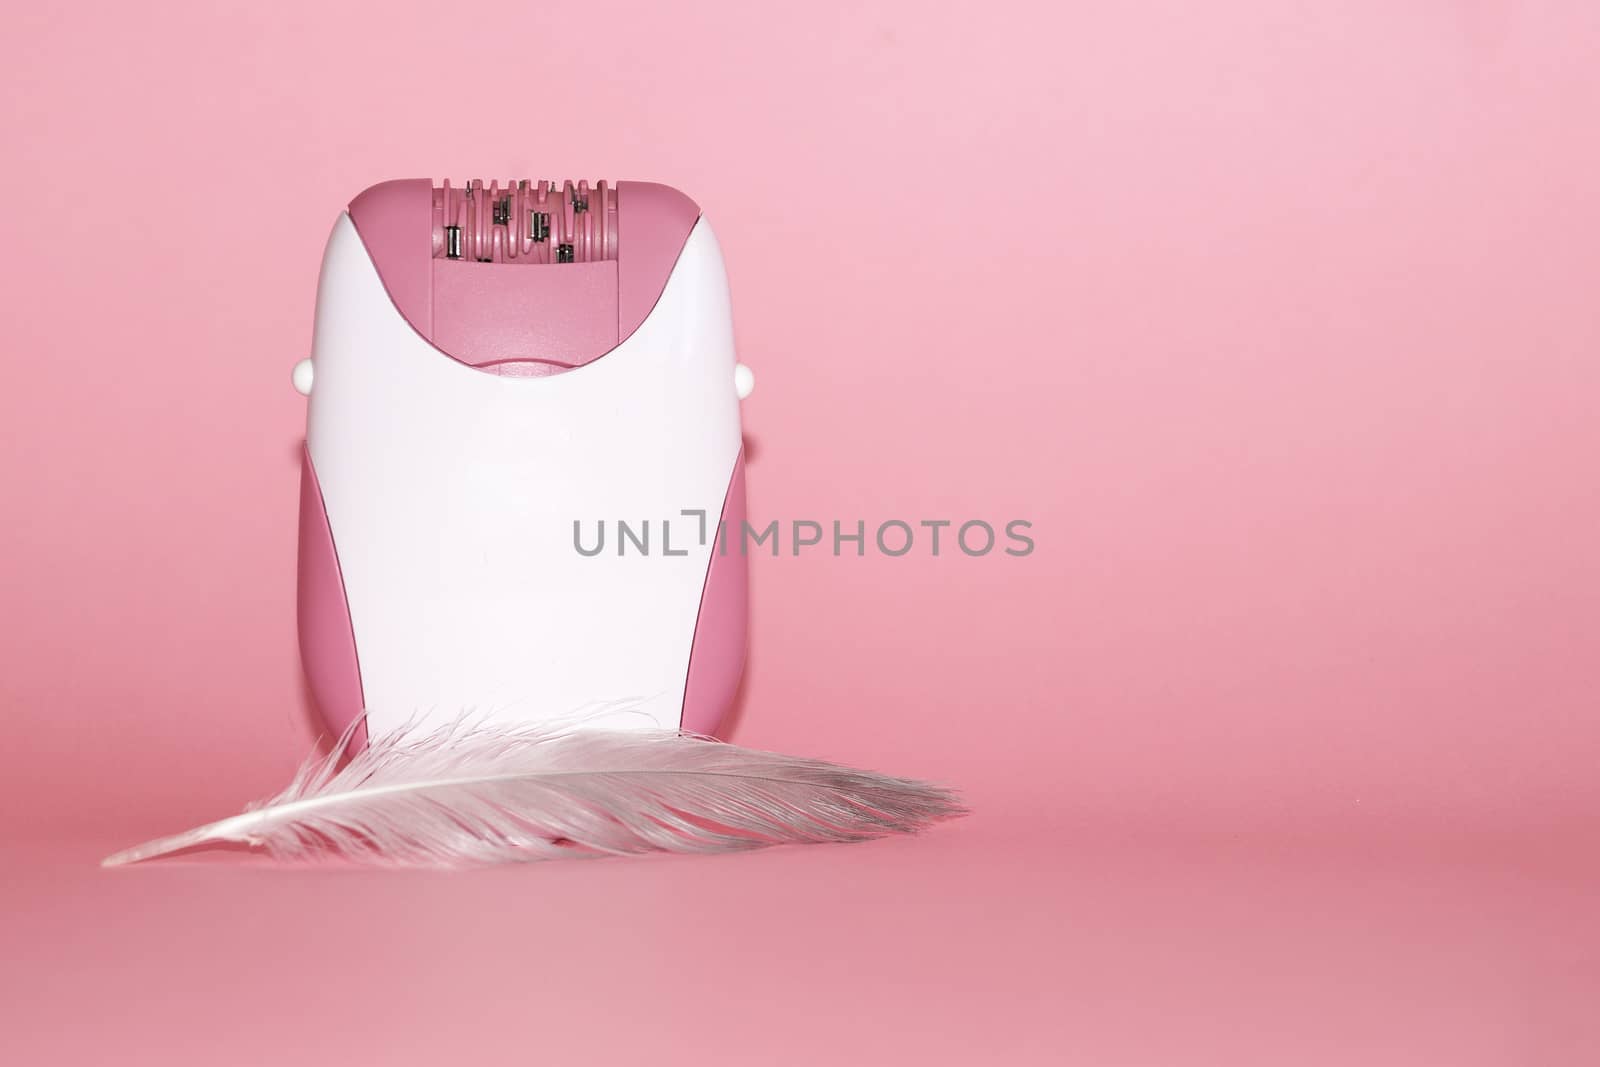 electric handheld epilator and feather on pink background close up by Annado